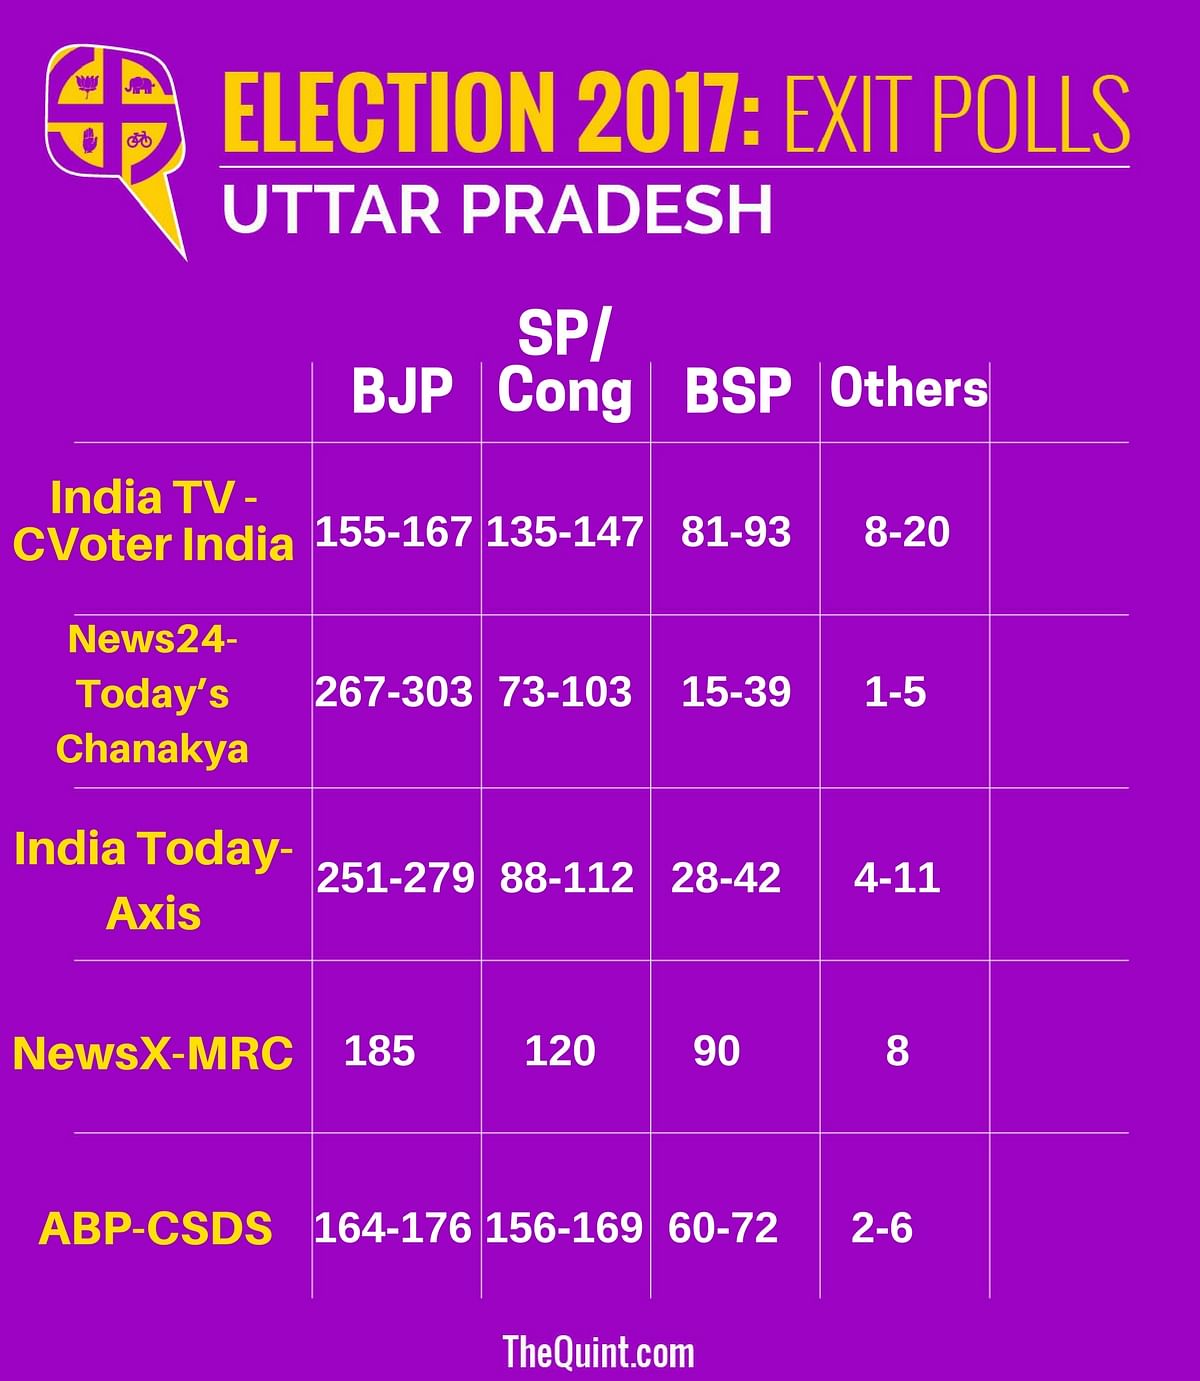 Who will win the Uttar Pradesh assembly election 2017? Latest UP exit poll news updates and video at The Quint.